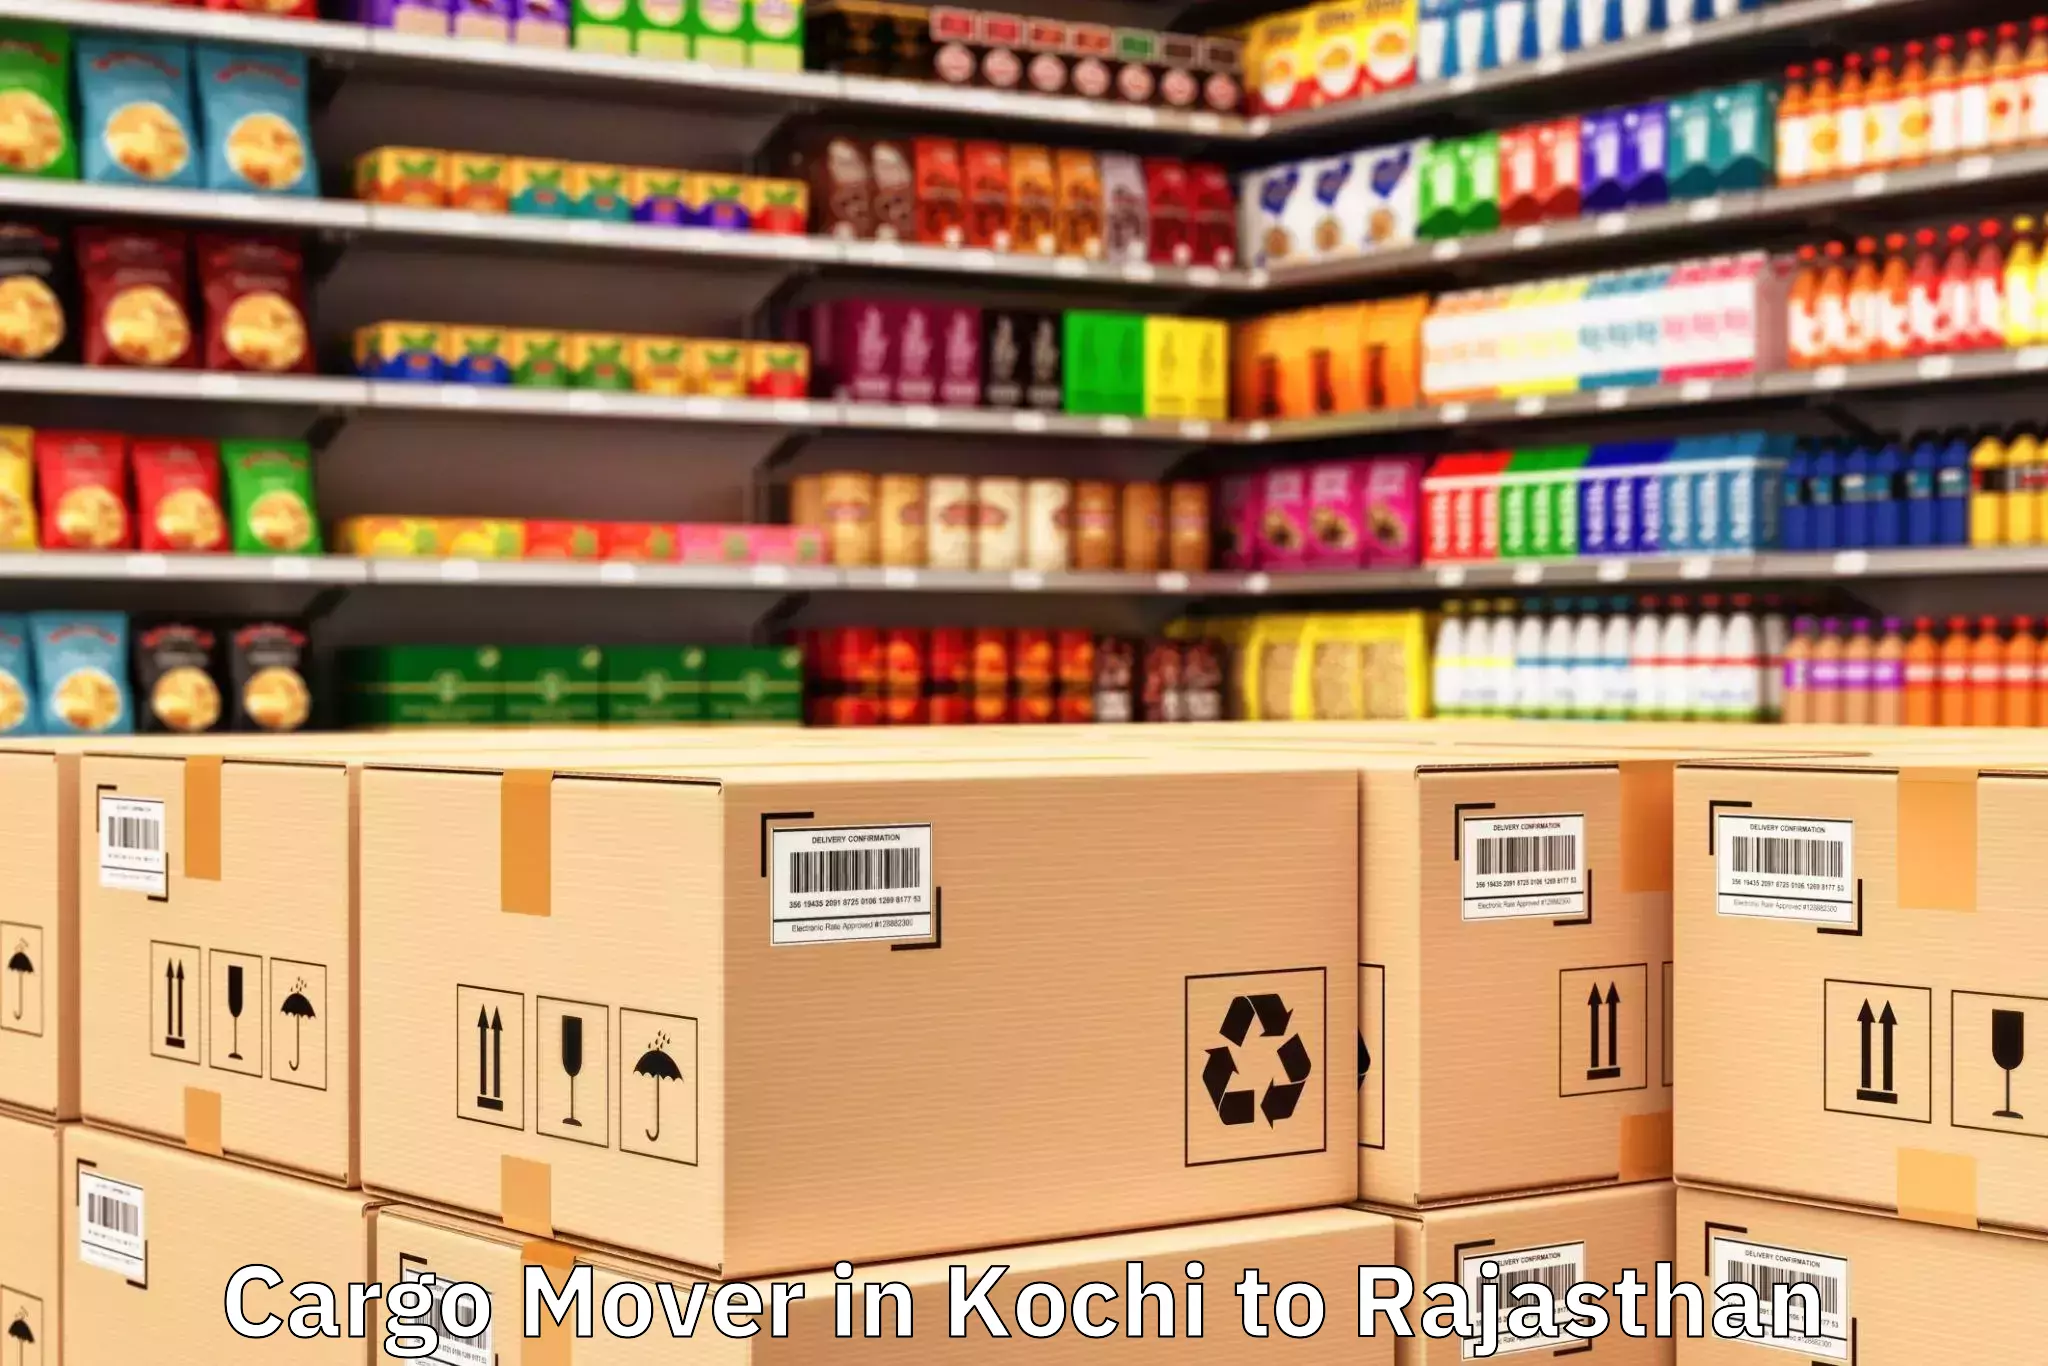 Easy Kochi to Rajasthan Cargo Mover Booking